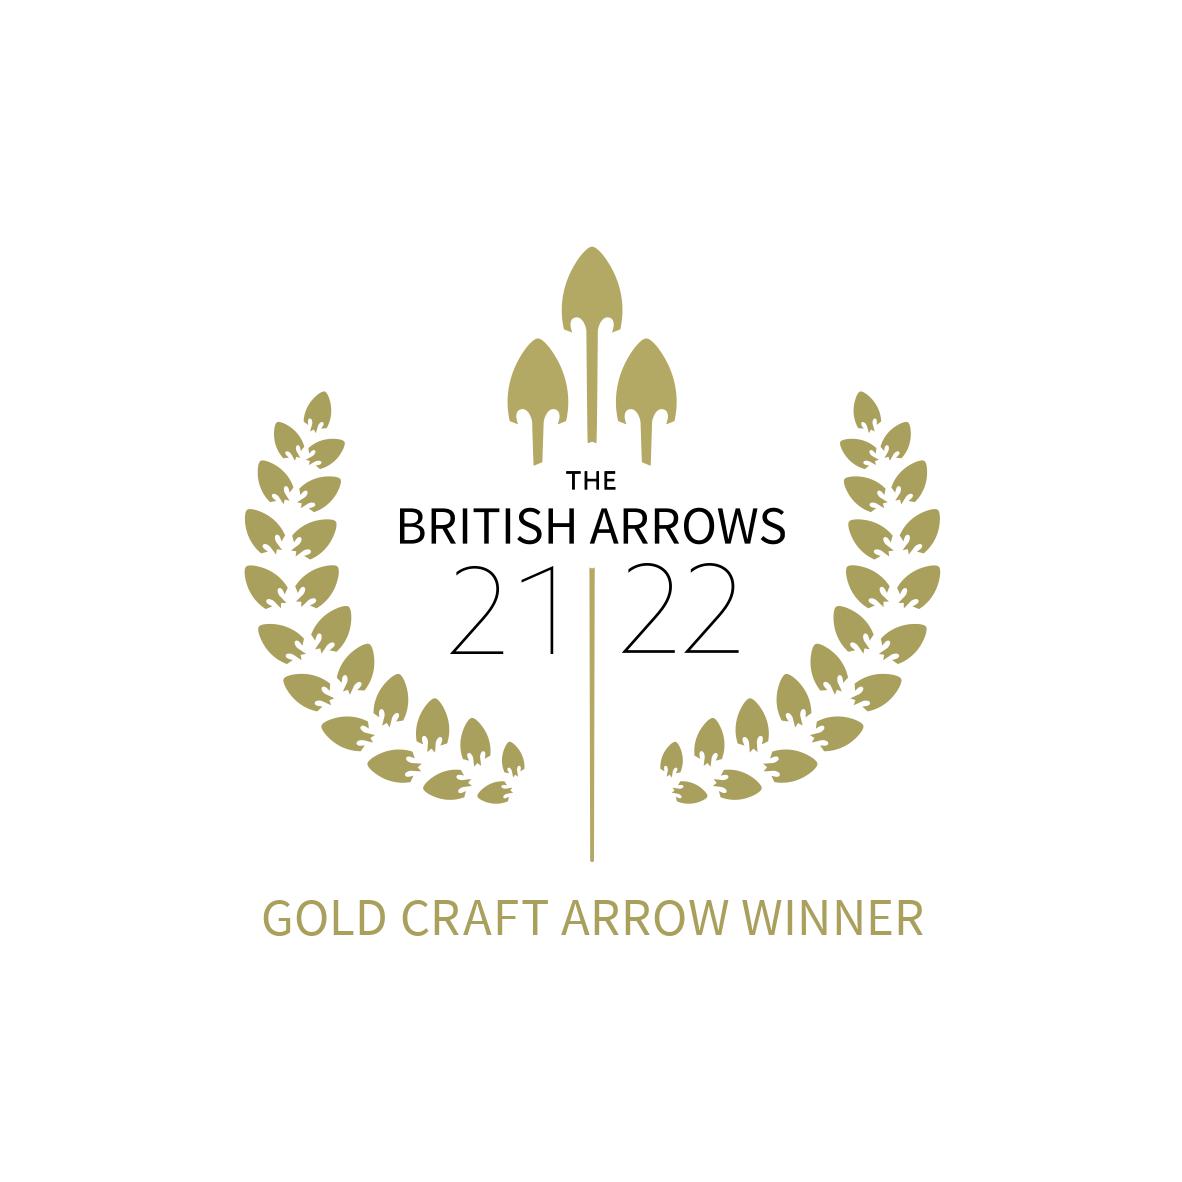 Wins at the British Arrows